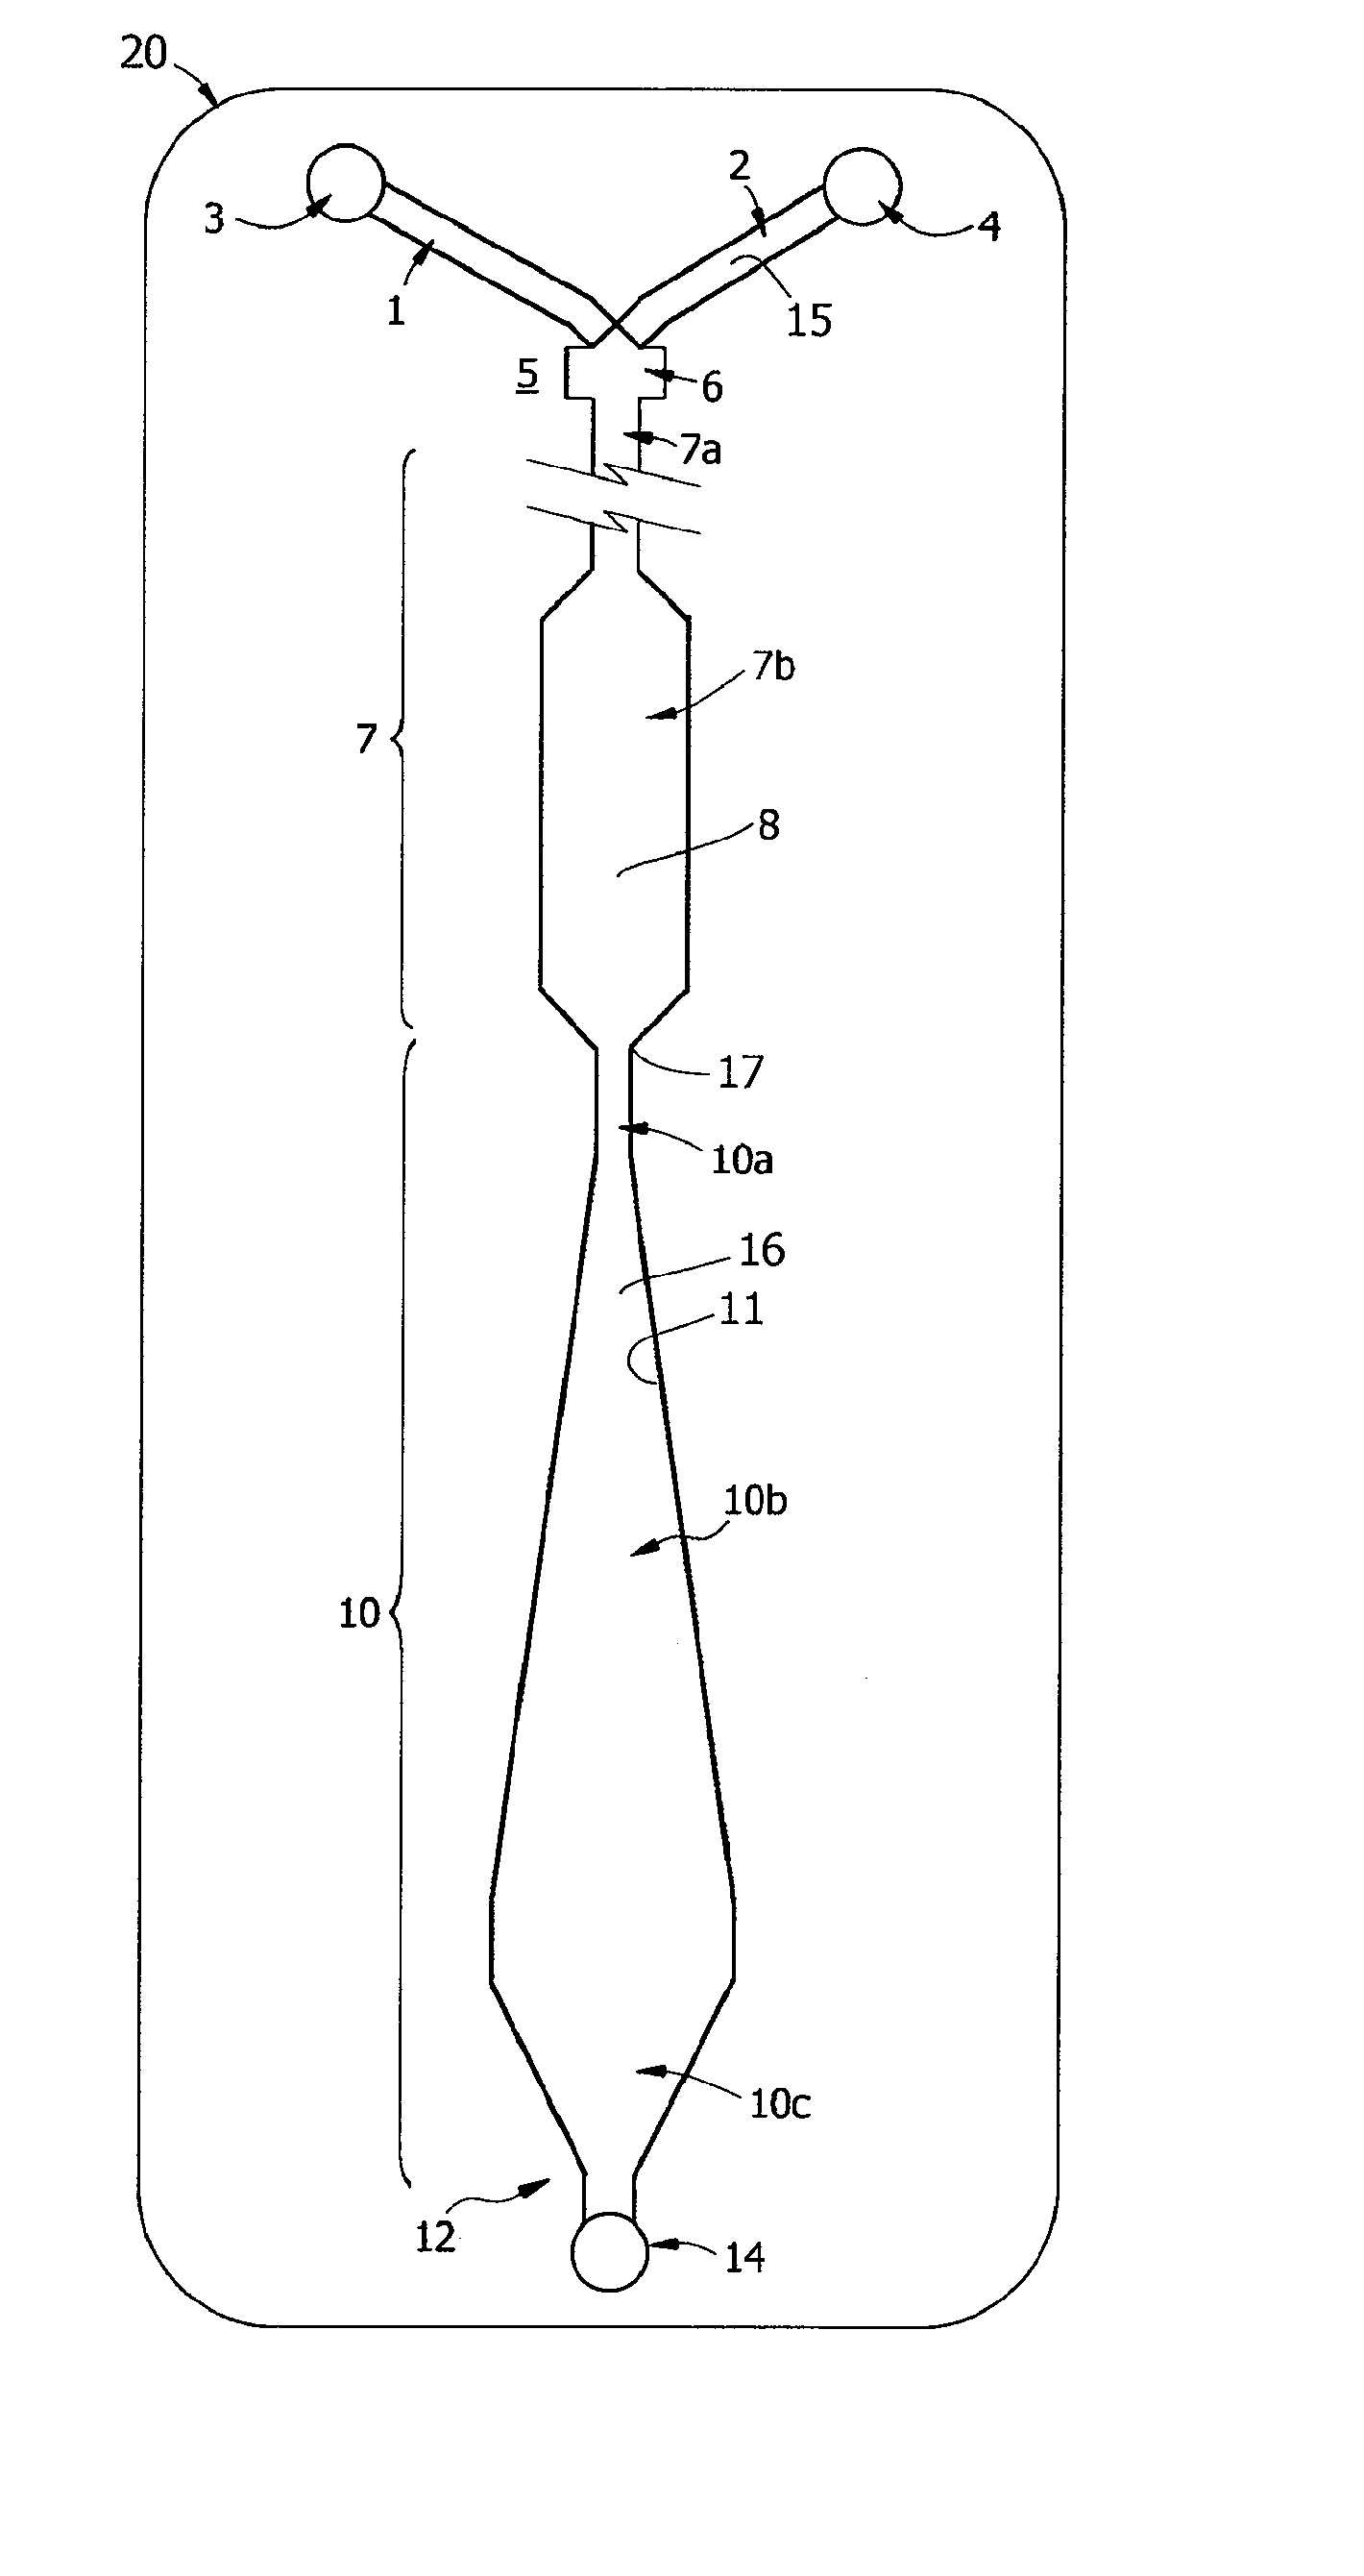 Microfluidic apparatus and methods for performing blood typing and crossmatching